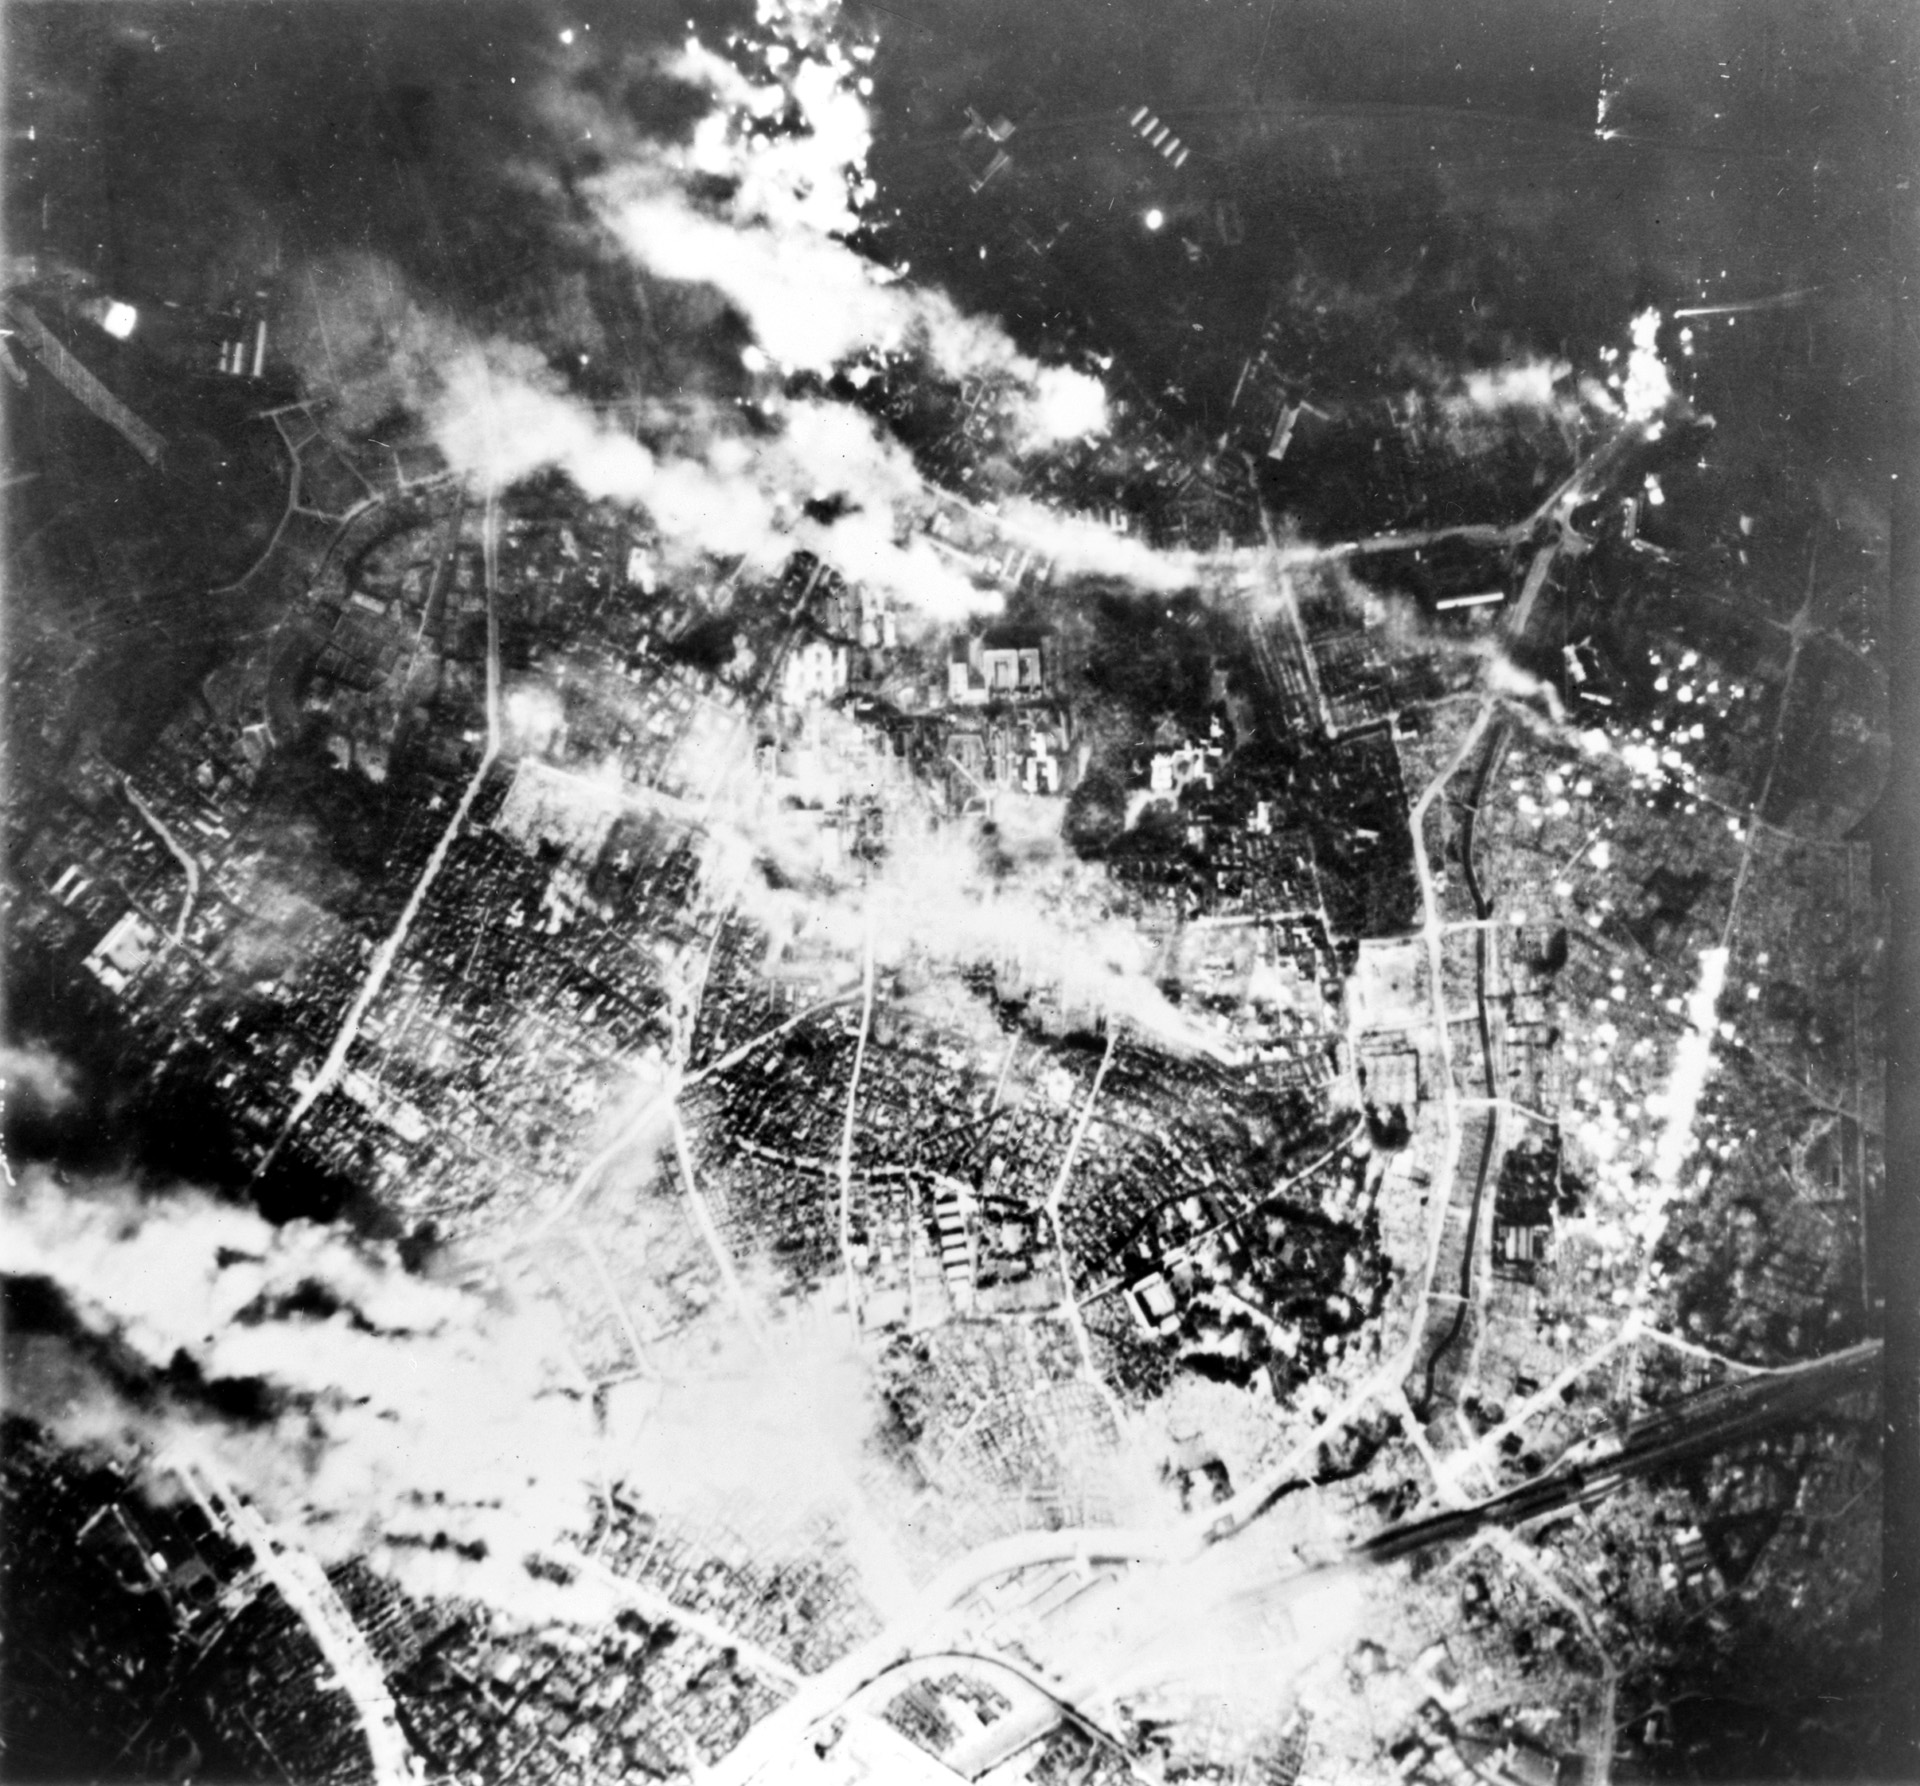 Tokyo night raid, May 26, 1945. The United States hoped that such massive destruction would compel the Japanese to surrender.